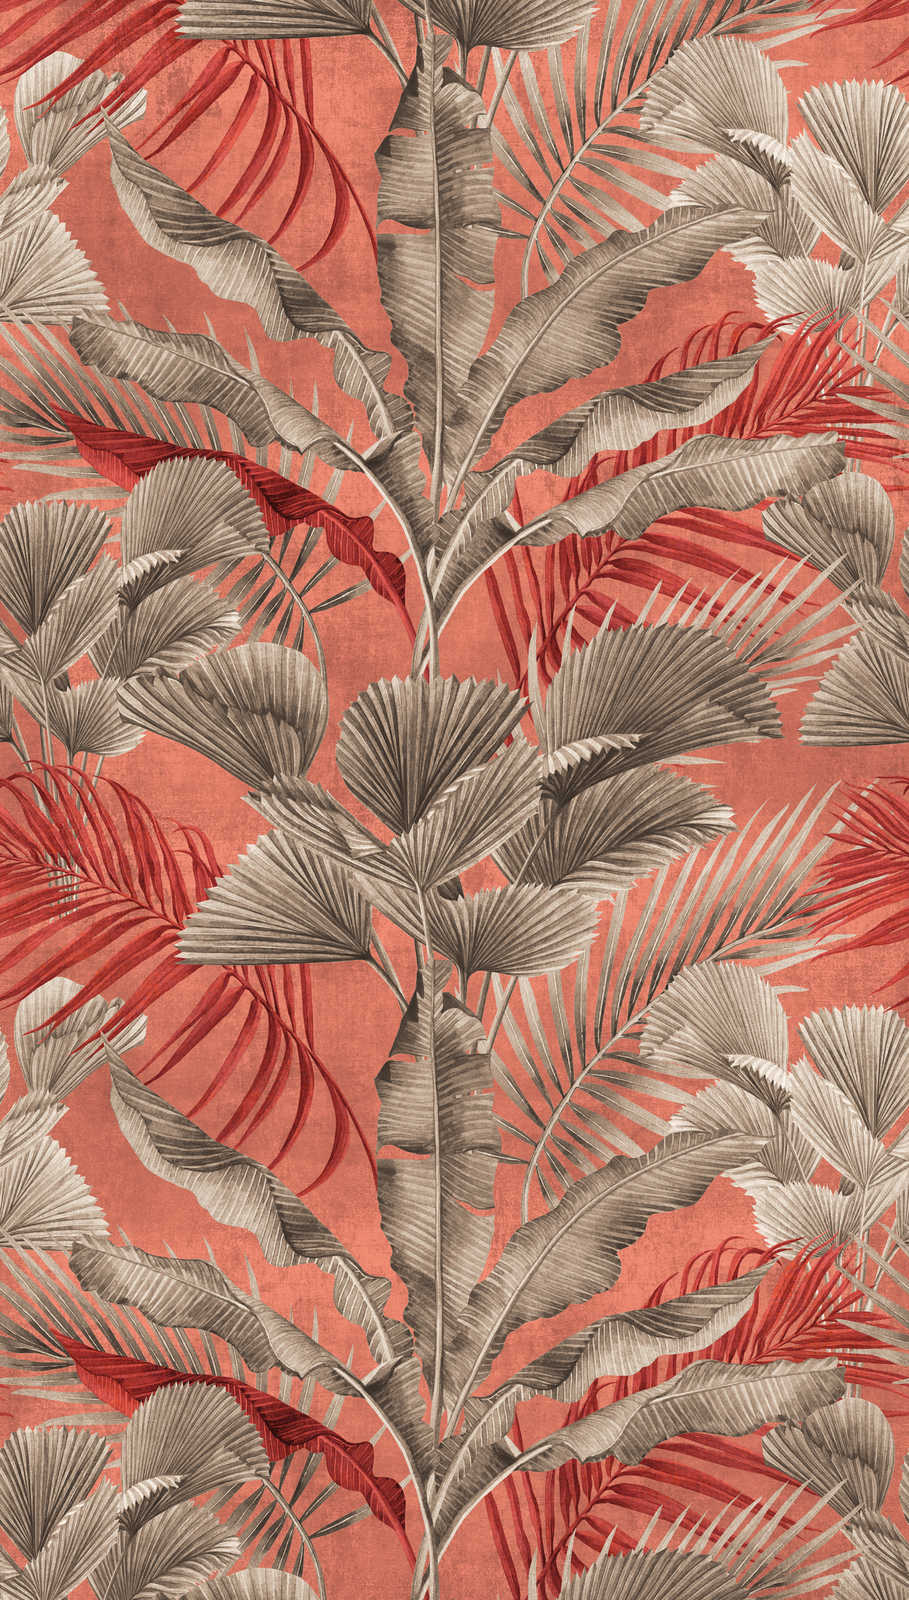             Jungle wallpaper with tropical plants - pink, red, grey
        